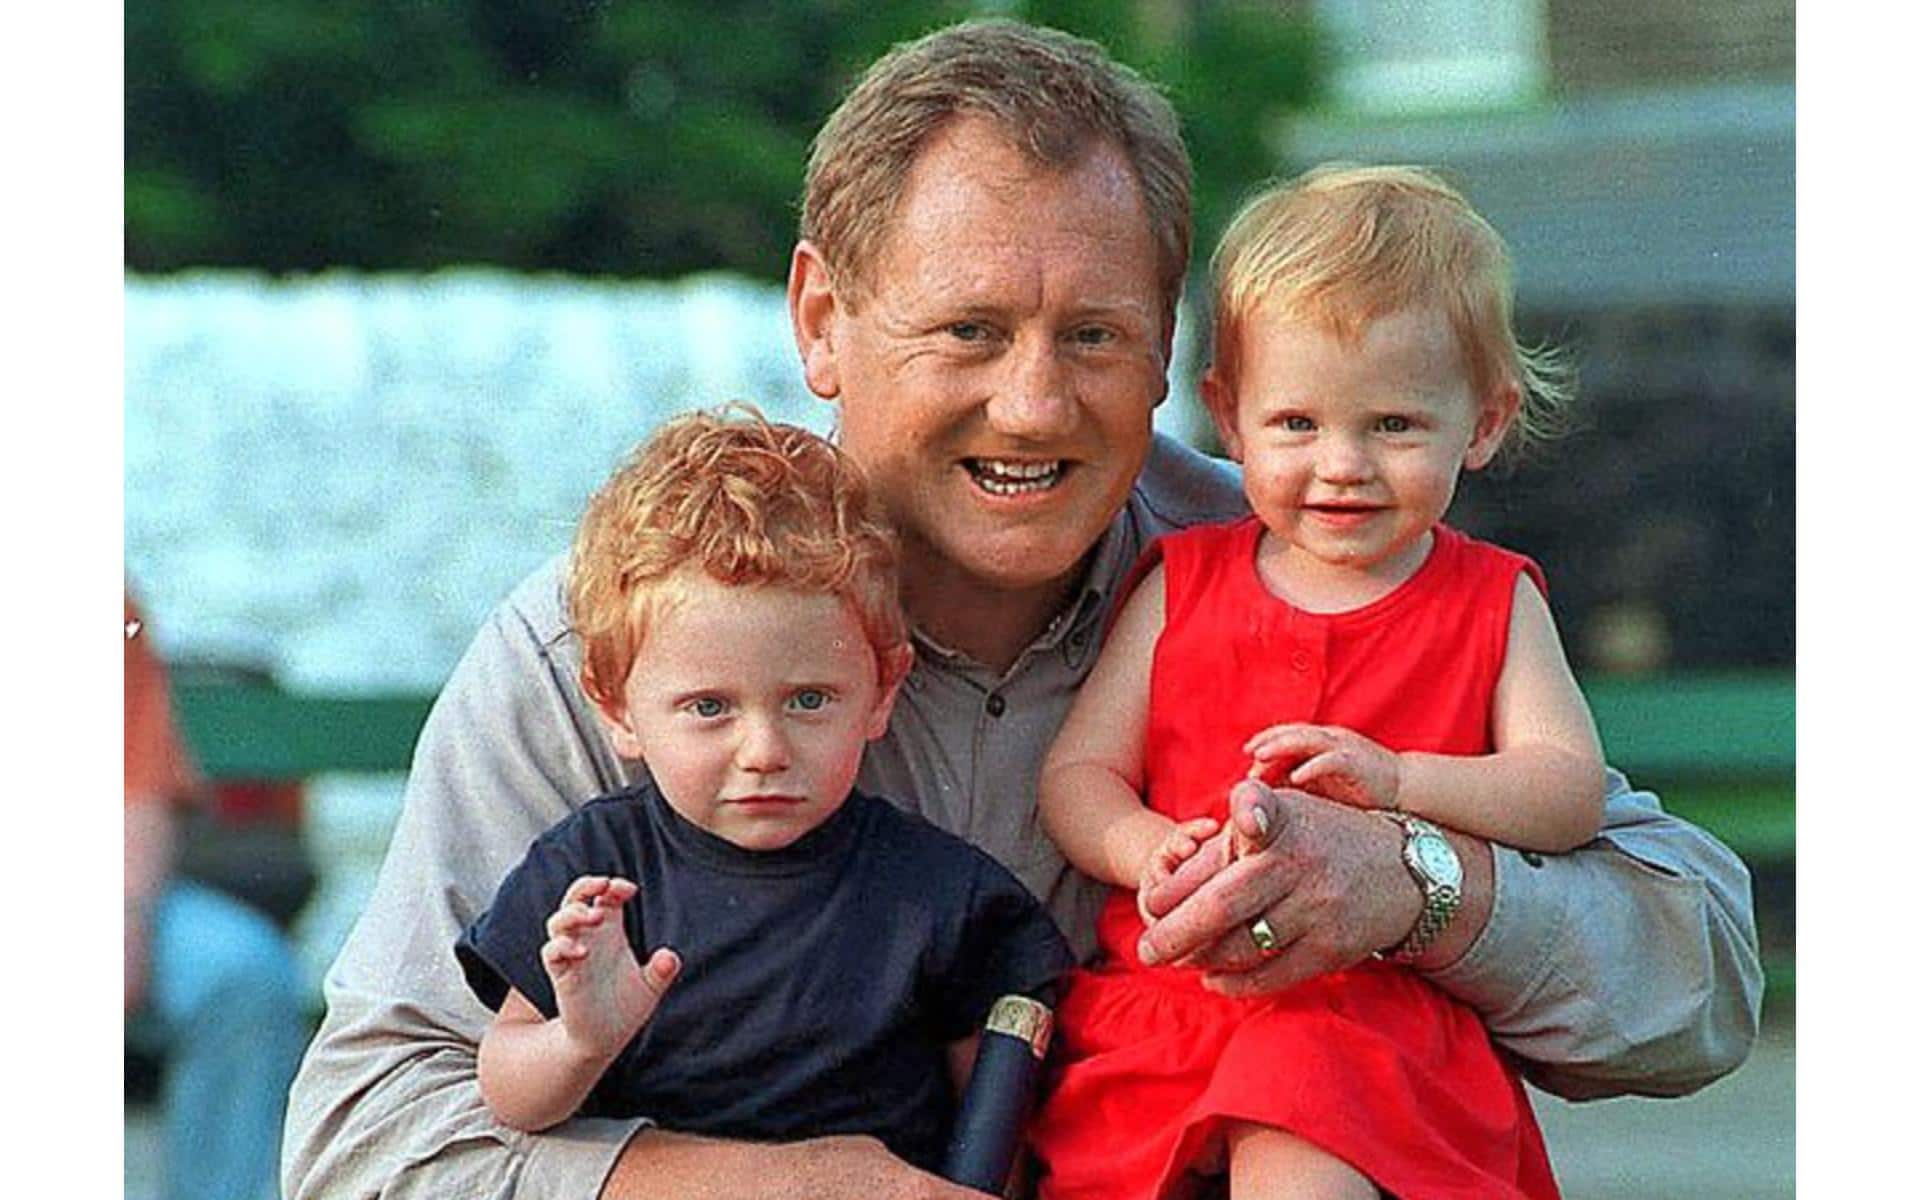 A young Bairstow along with his father and sister [X]